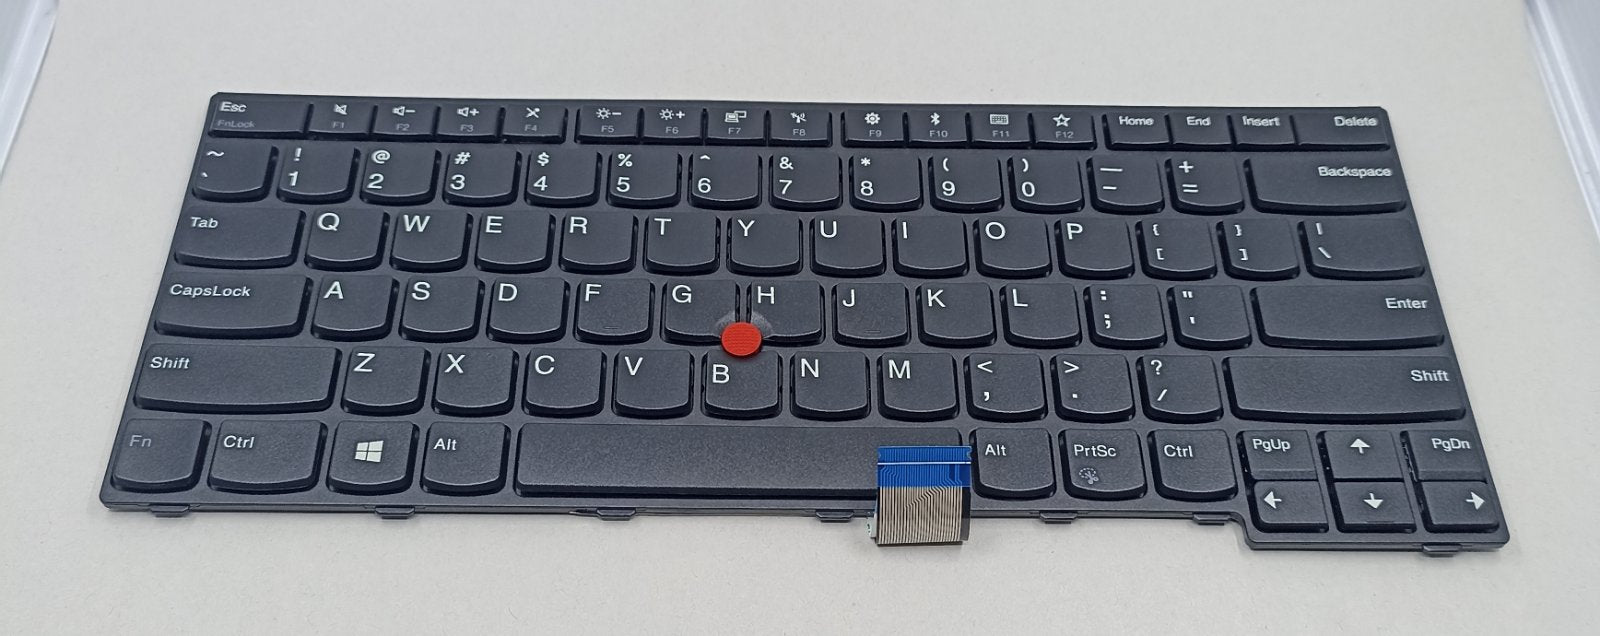 Replacement Keyboard Keys For Lenovo E470 ThinkPad A1